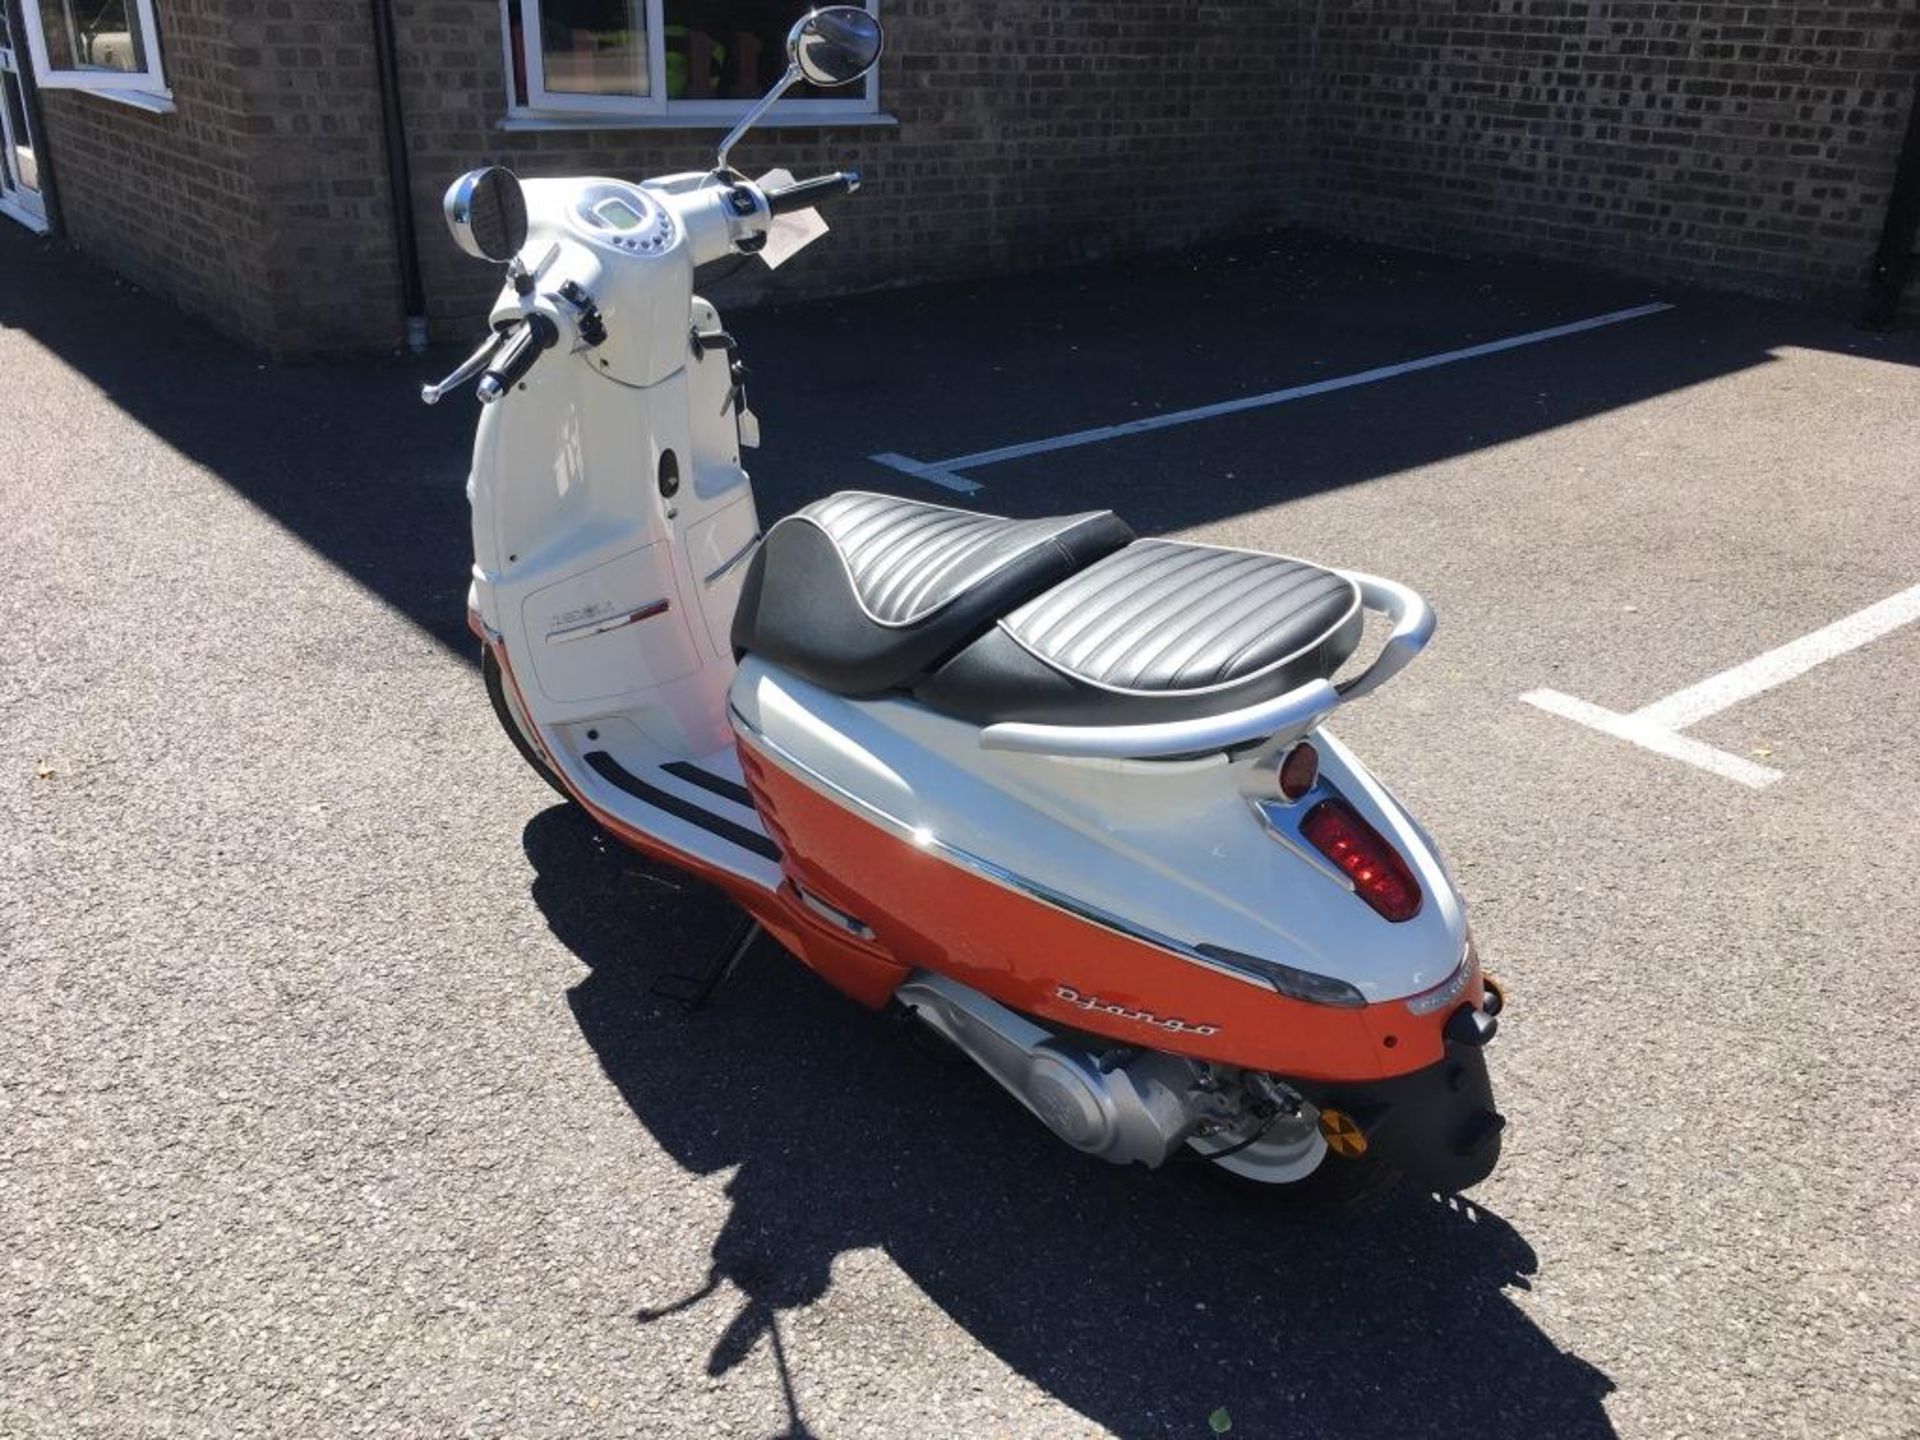 Peugeot Django 125 Evasion ABS moped, Unregistered and no certificate of conformity held, VIN: - Image 4 of 12